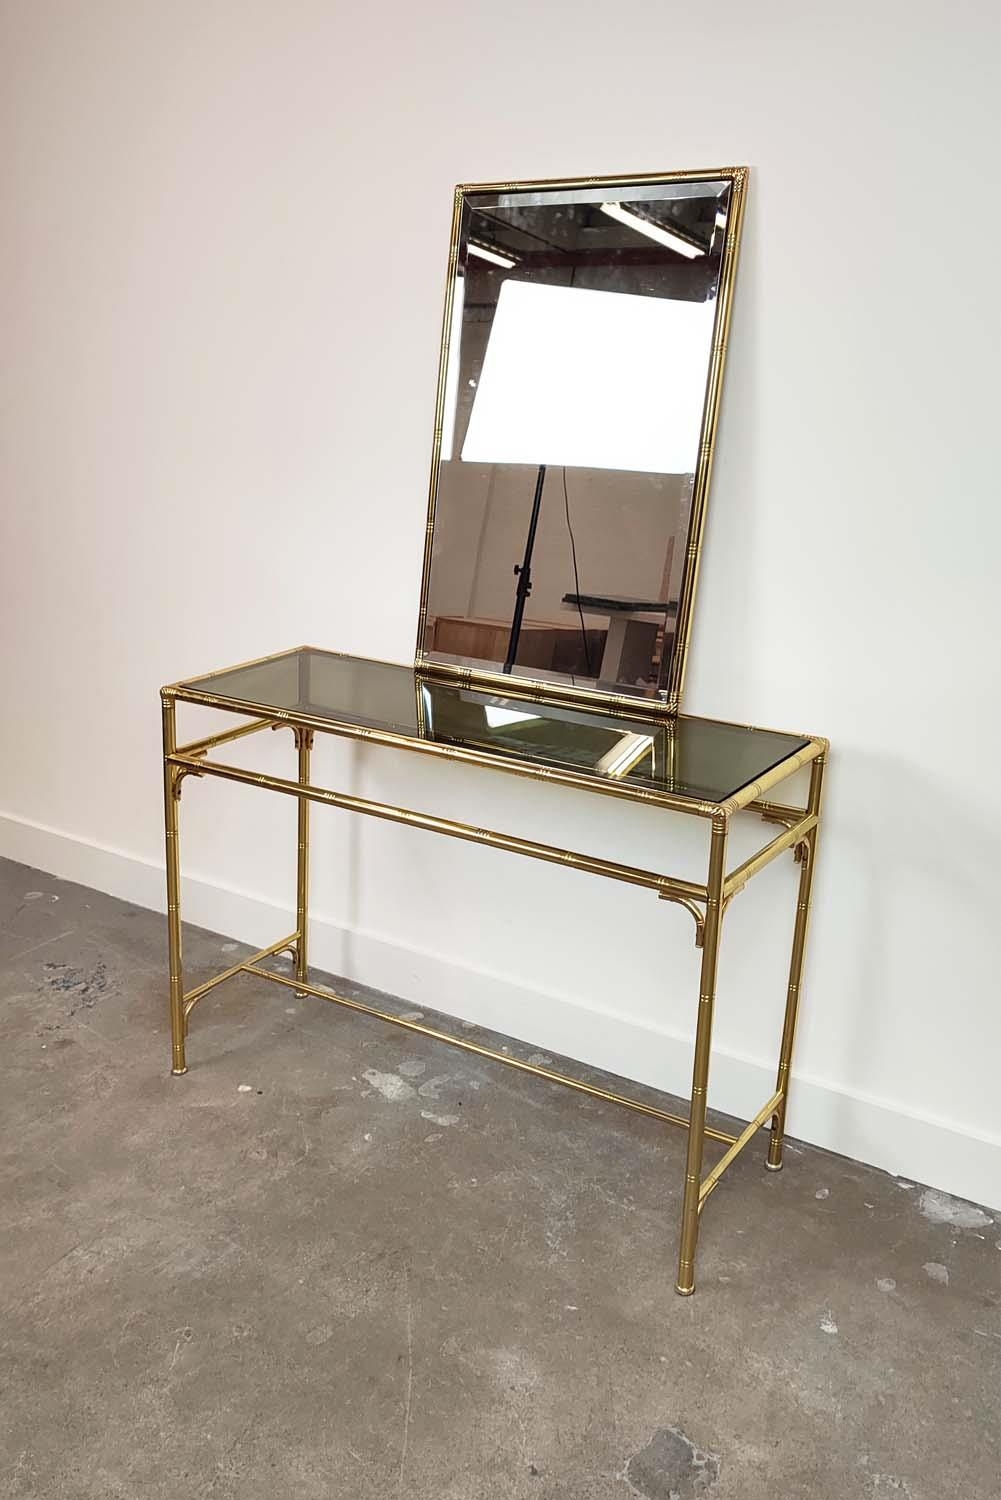 CONSOLE TABLE, gilt metal faux bamboo with glass top 109cm x 78cm H x 35cm, together with a matching